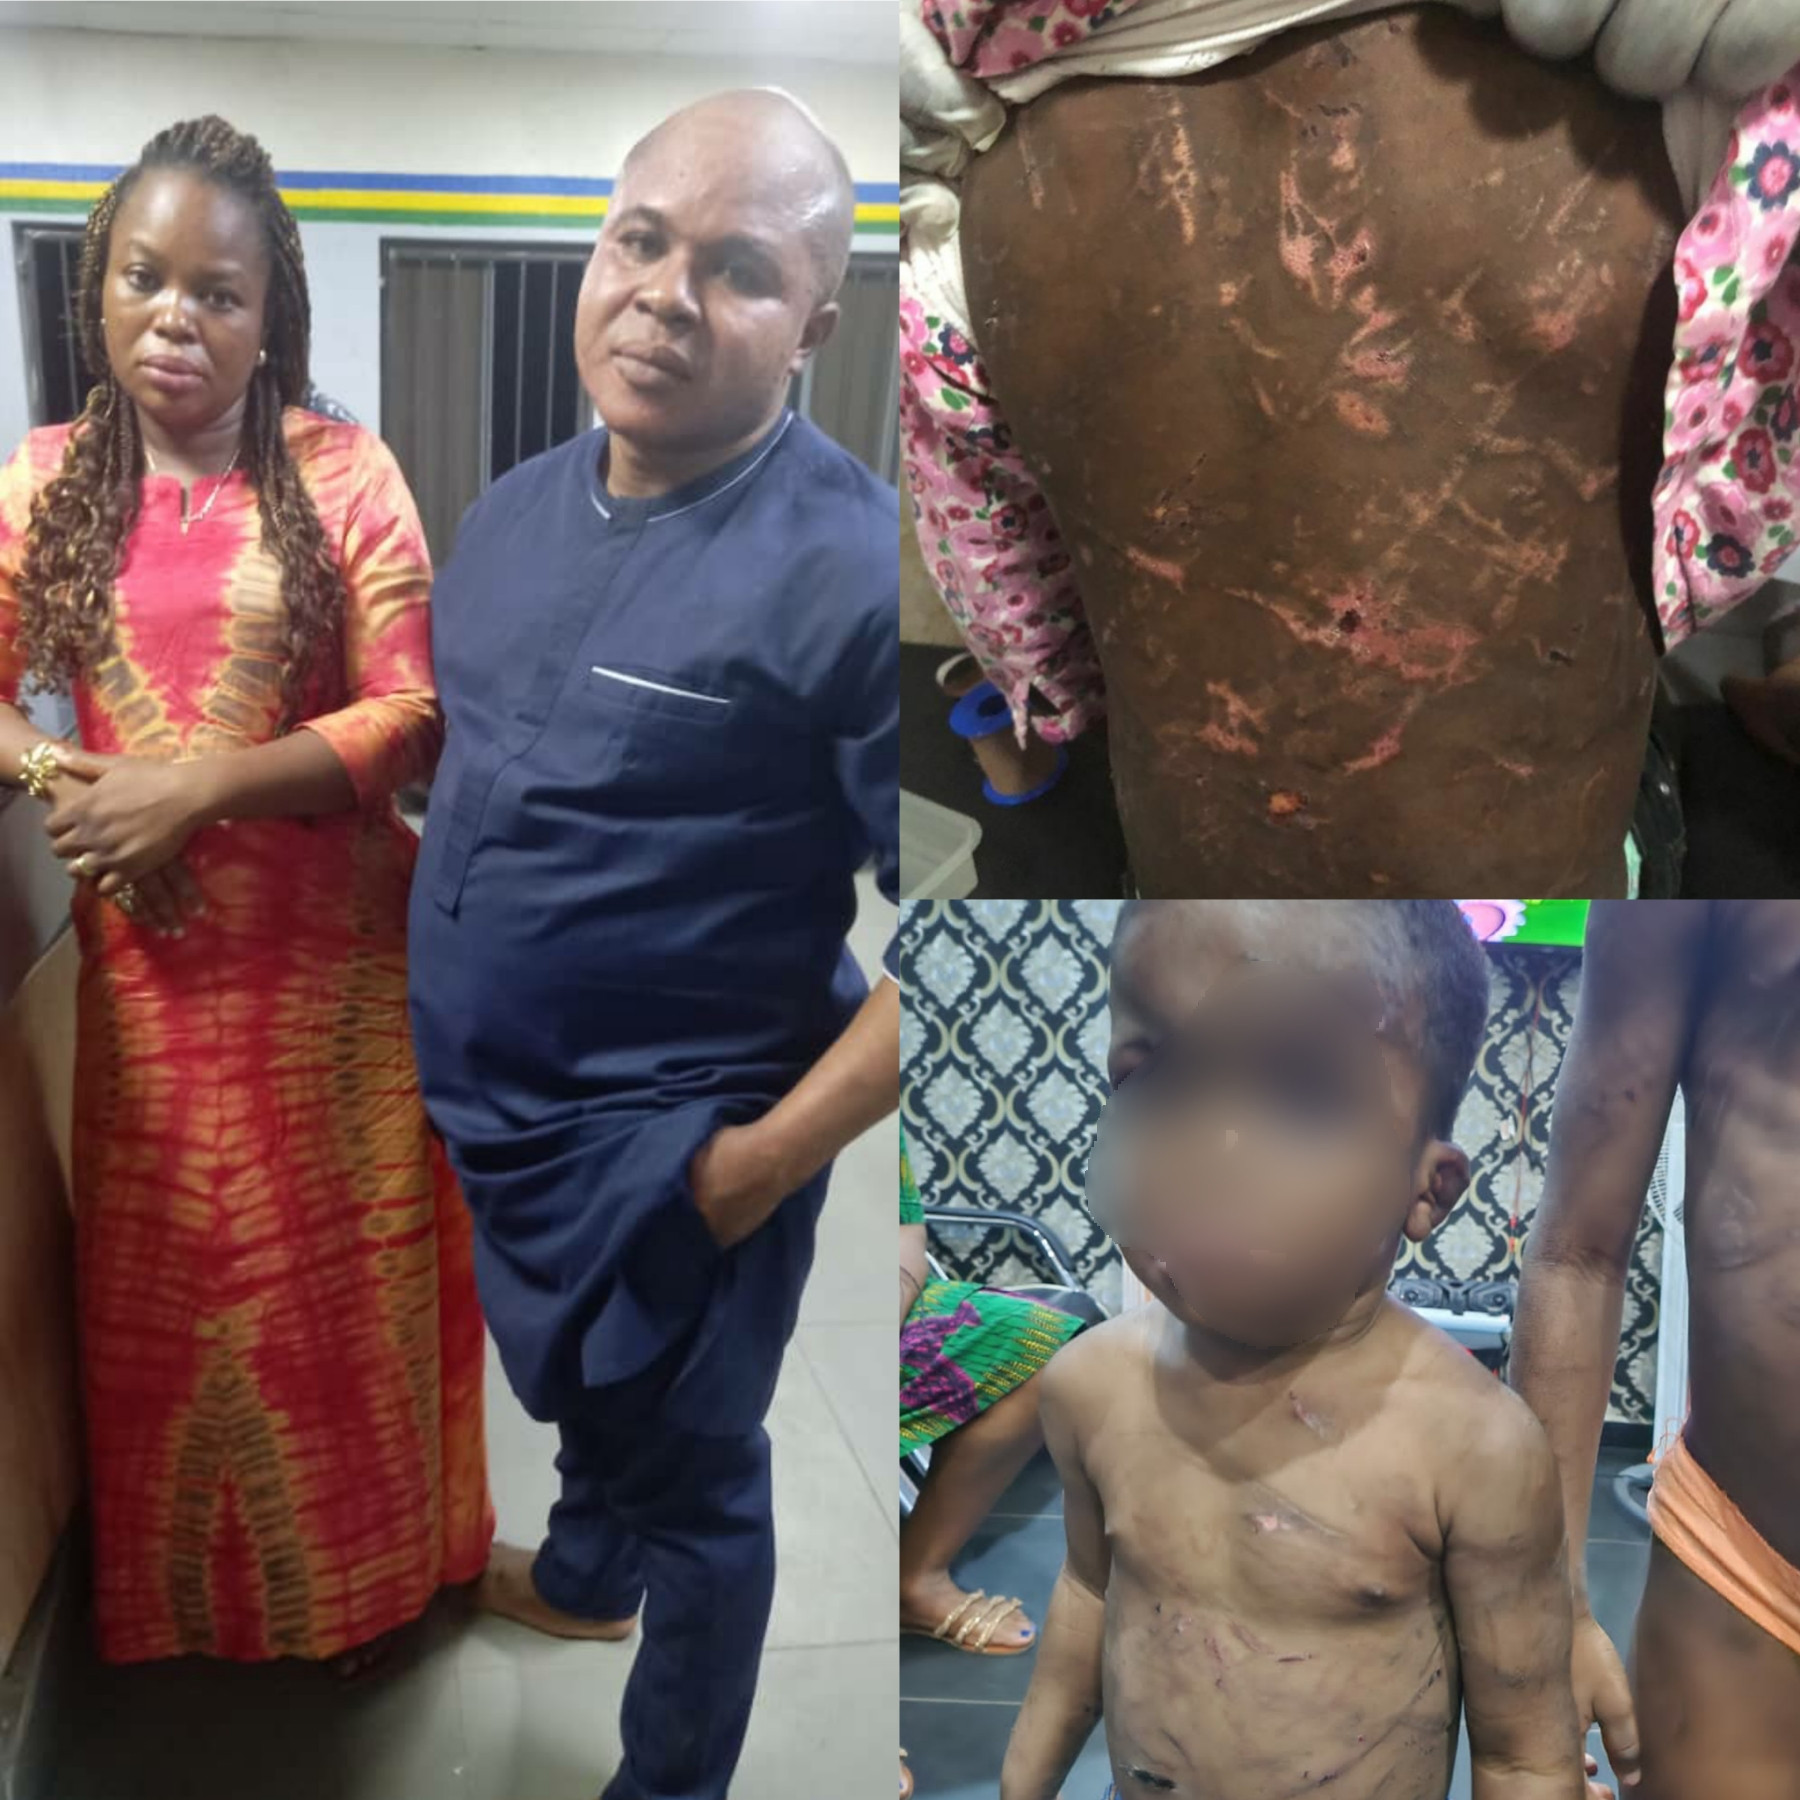 WOMAN AND HER PARTNER ARRESTED FOR ALLEGEDLY BATTERING HER TWO CHILDREN AGED 5 AND 2….SEE HORRIFIC PHOTOS OF THEIR BATTERED BODIES